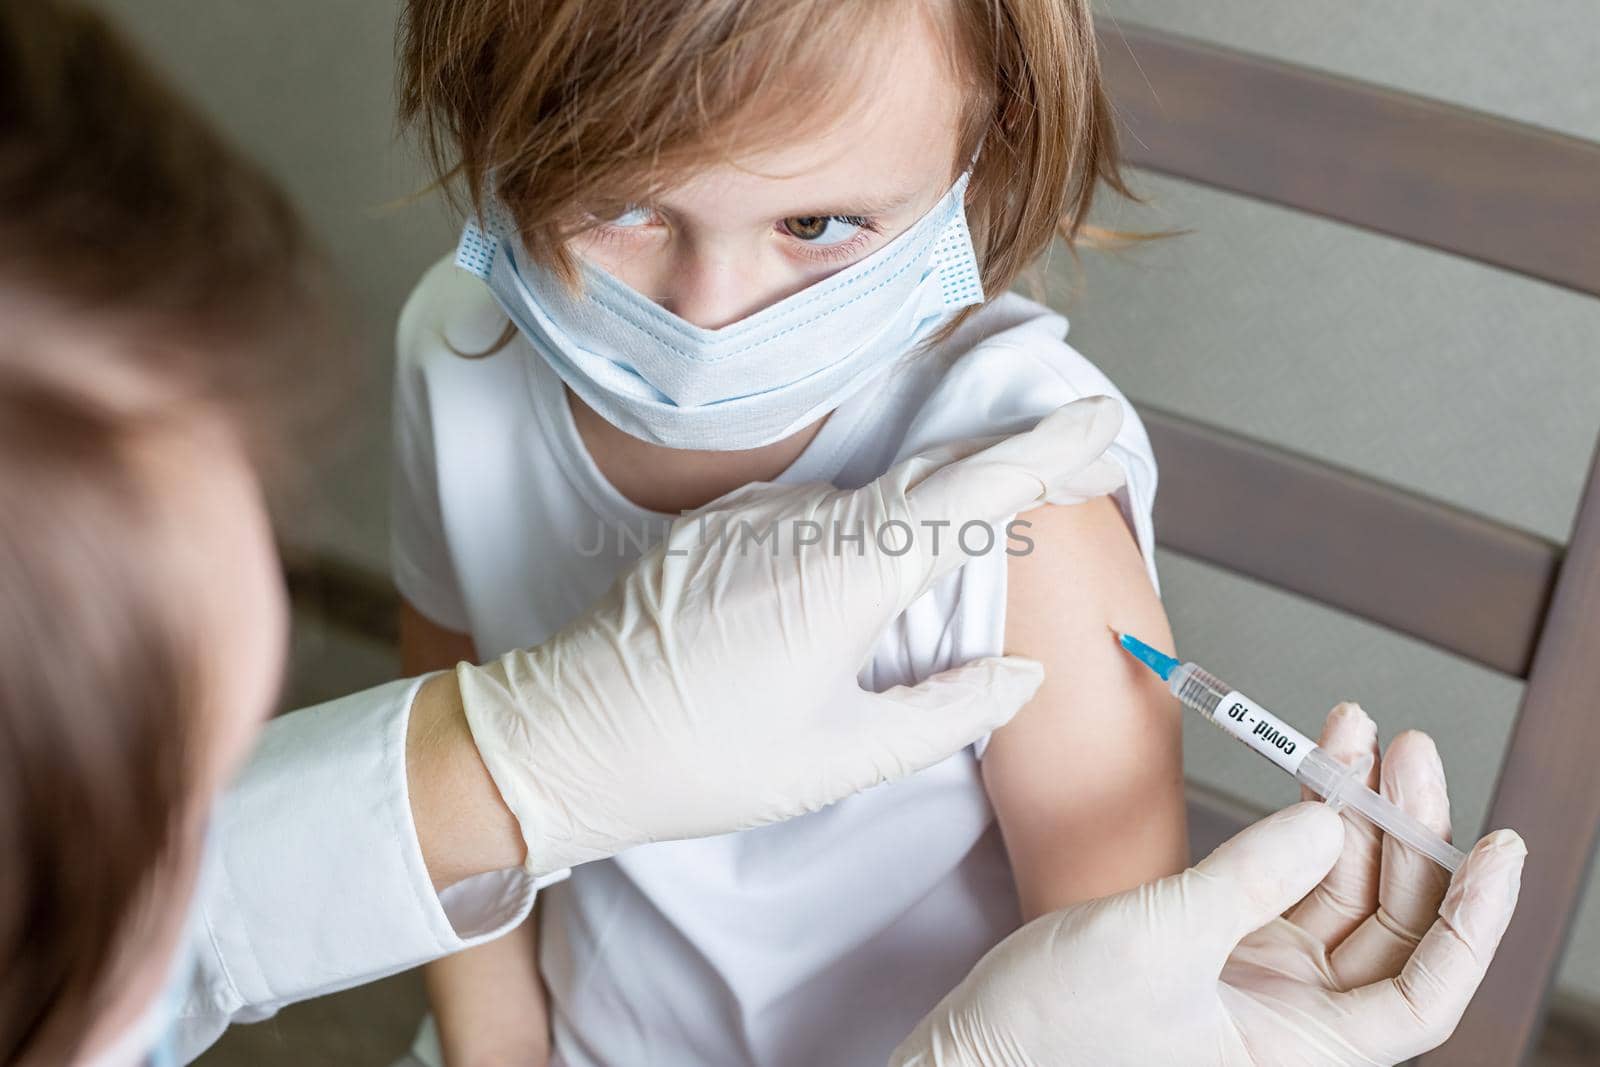 Doctor in a medical mask and gloves makes an injection of a vaccine against a coronavirus infection into the shoulder of a little caucasian girl in a medical mask, the girl looks at the doctor